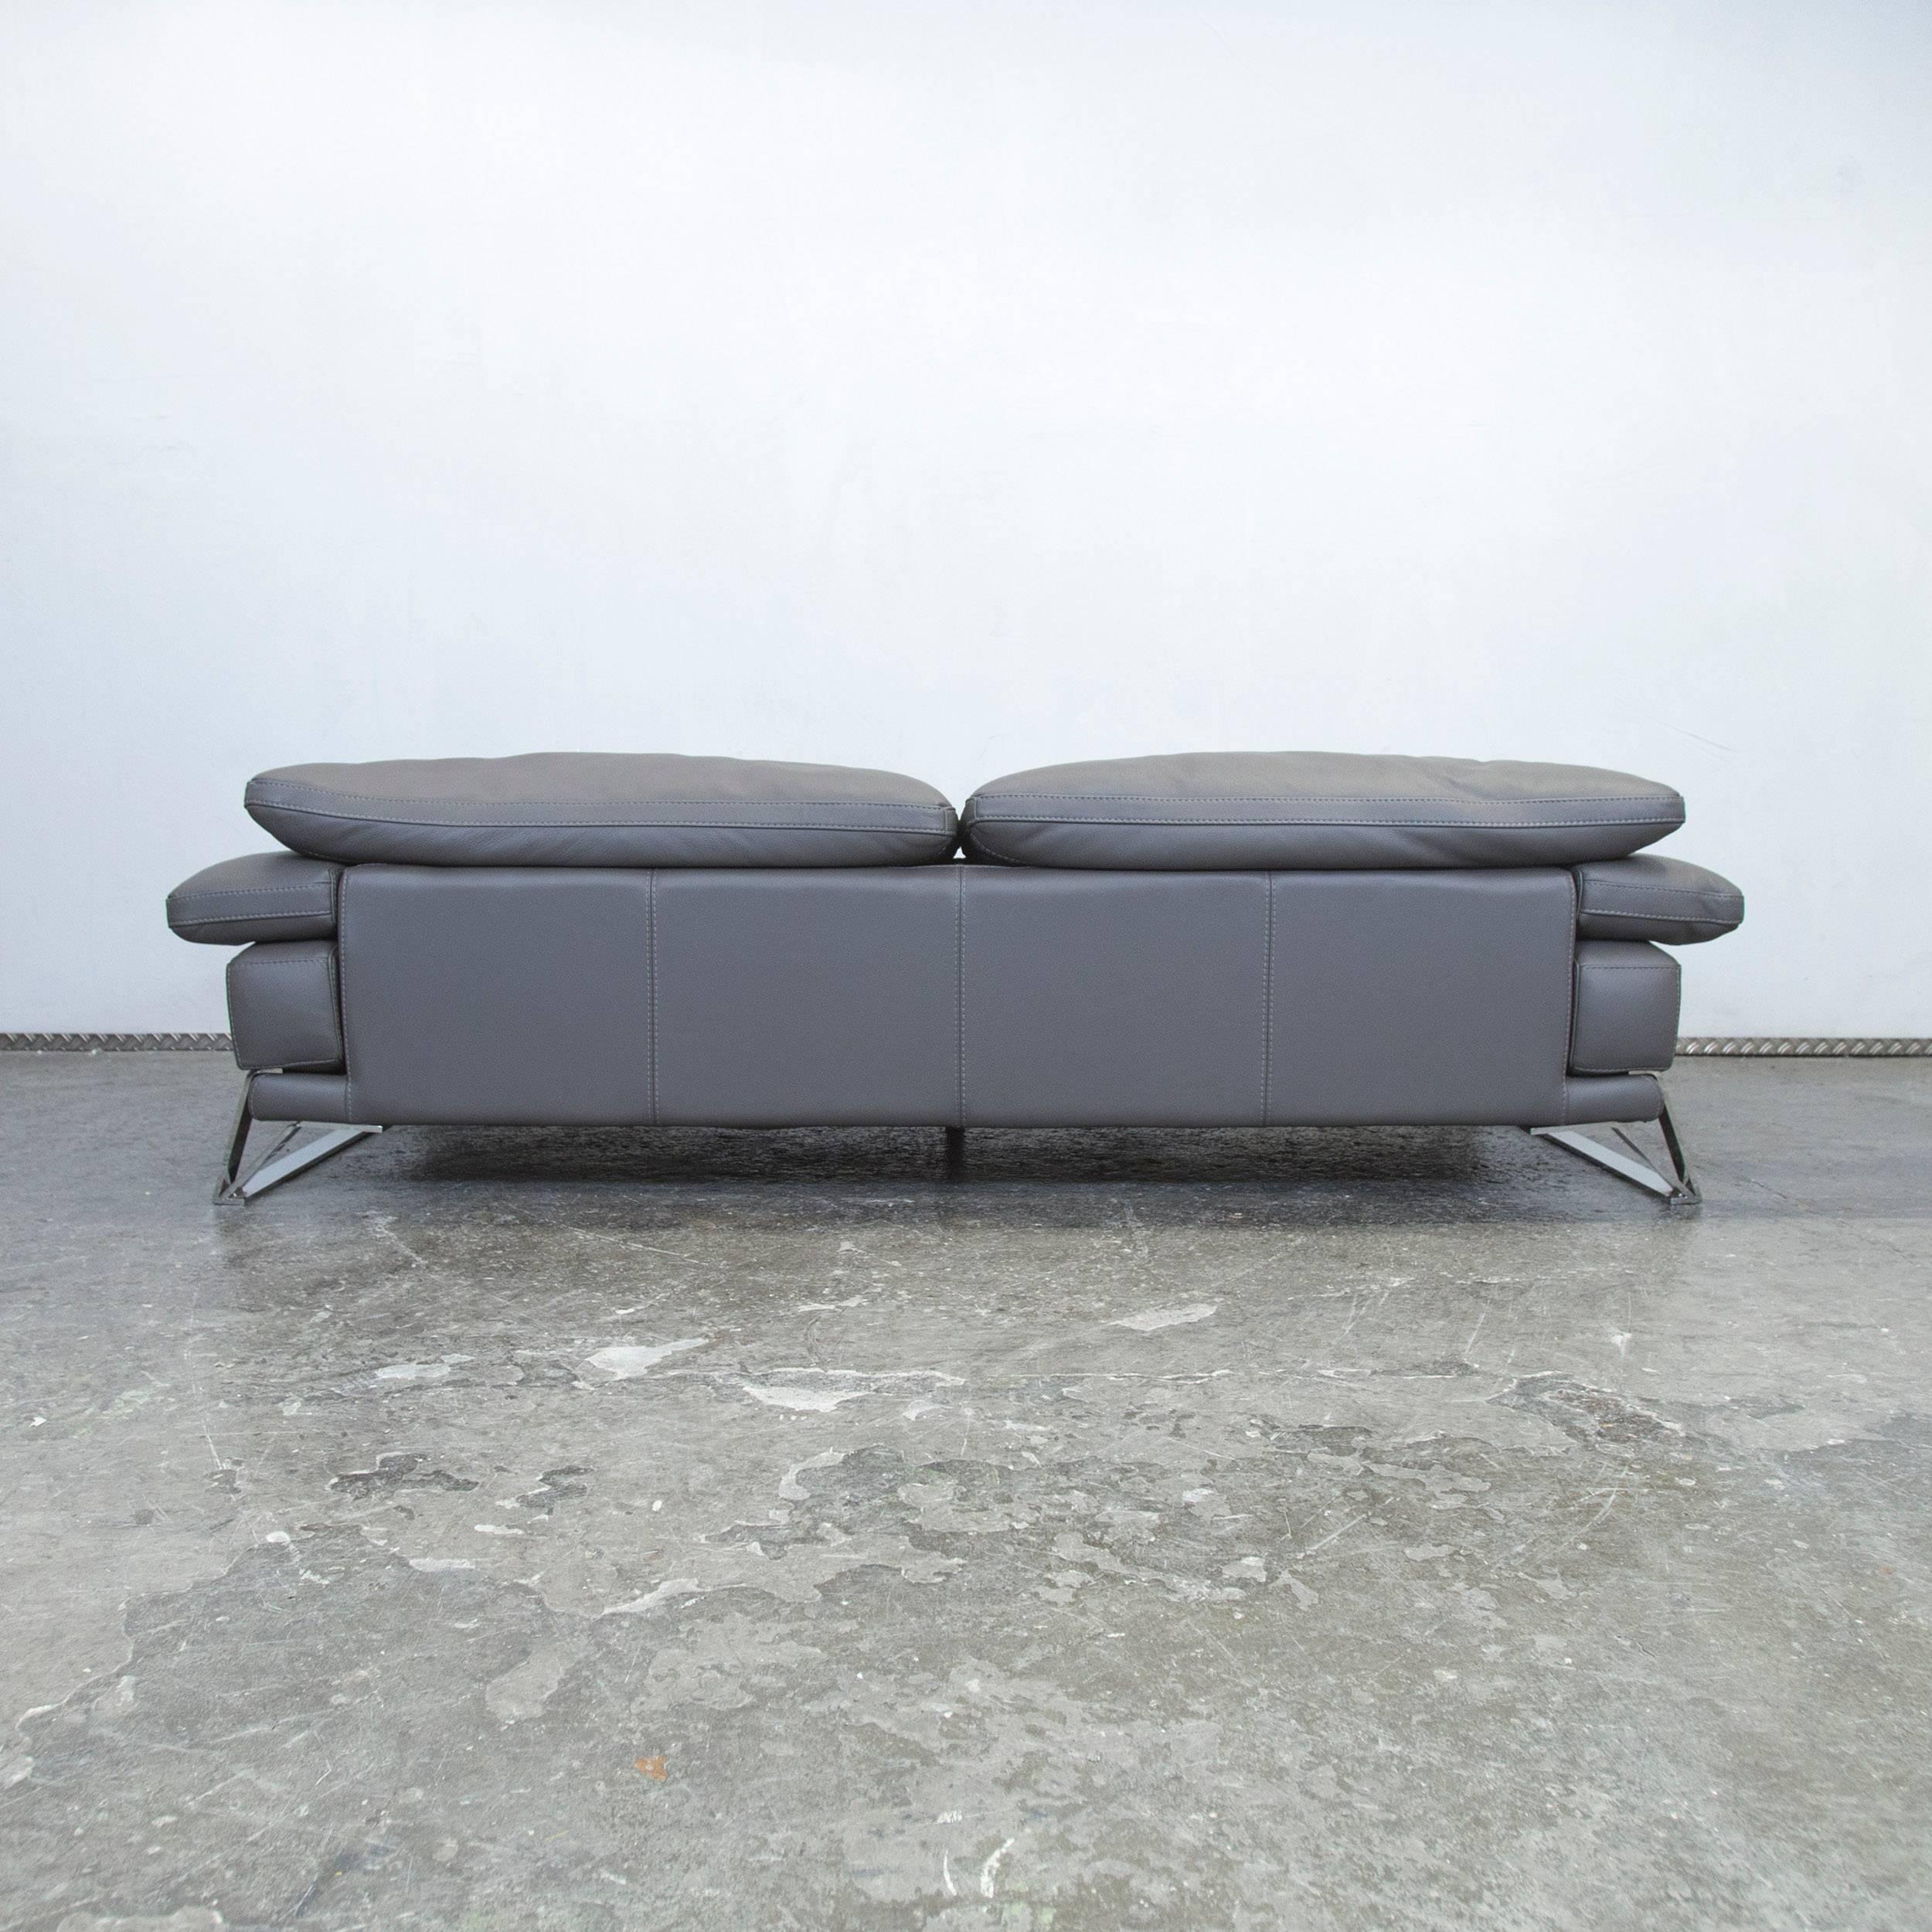 Roche Bobois Designer Sofa Grey Leather Three-Seat Couch Function Modern 3